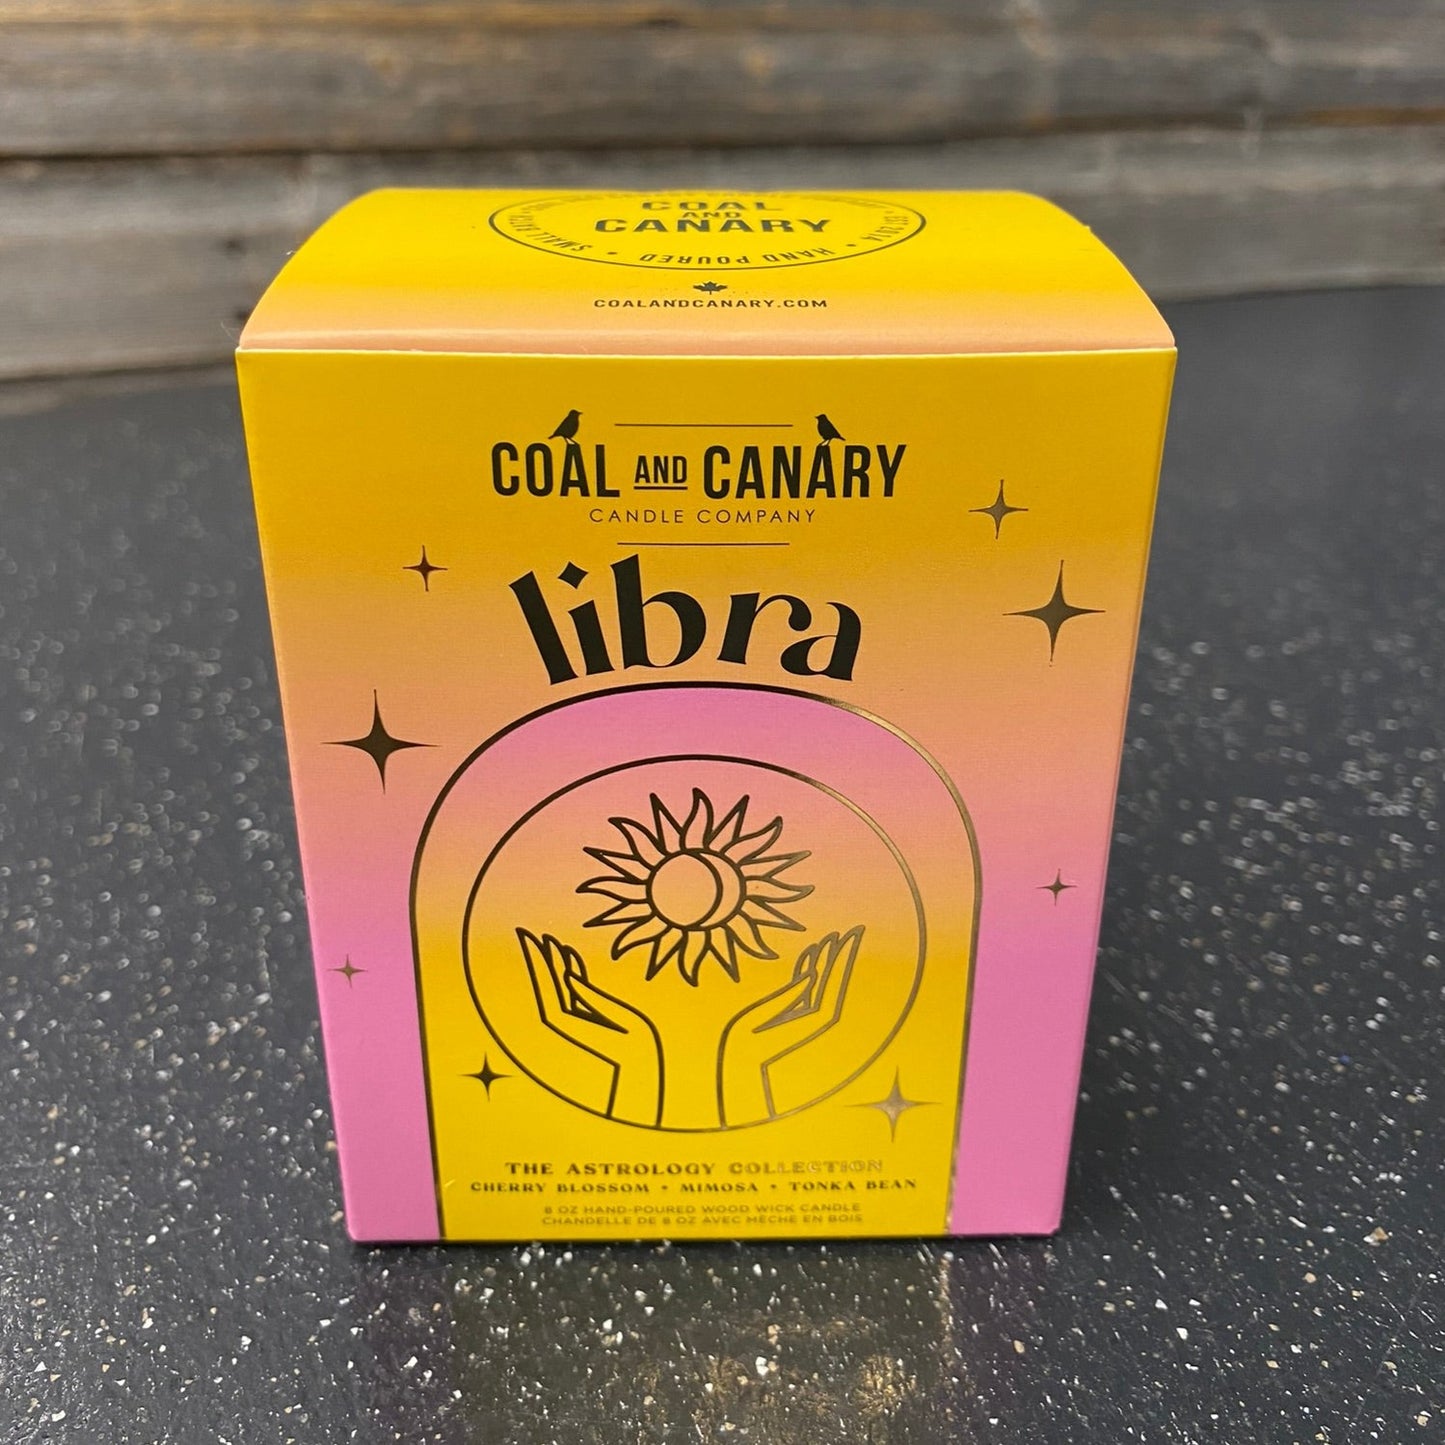 Libra by Coal & Canary